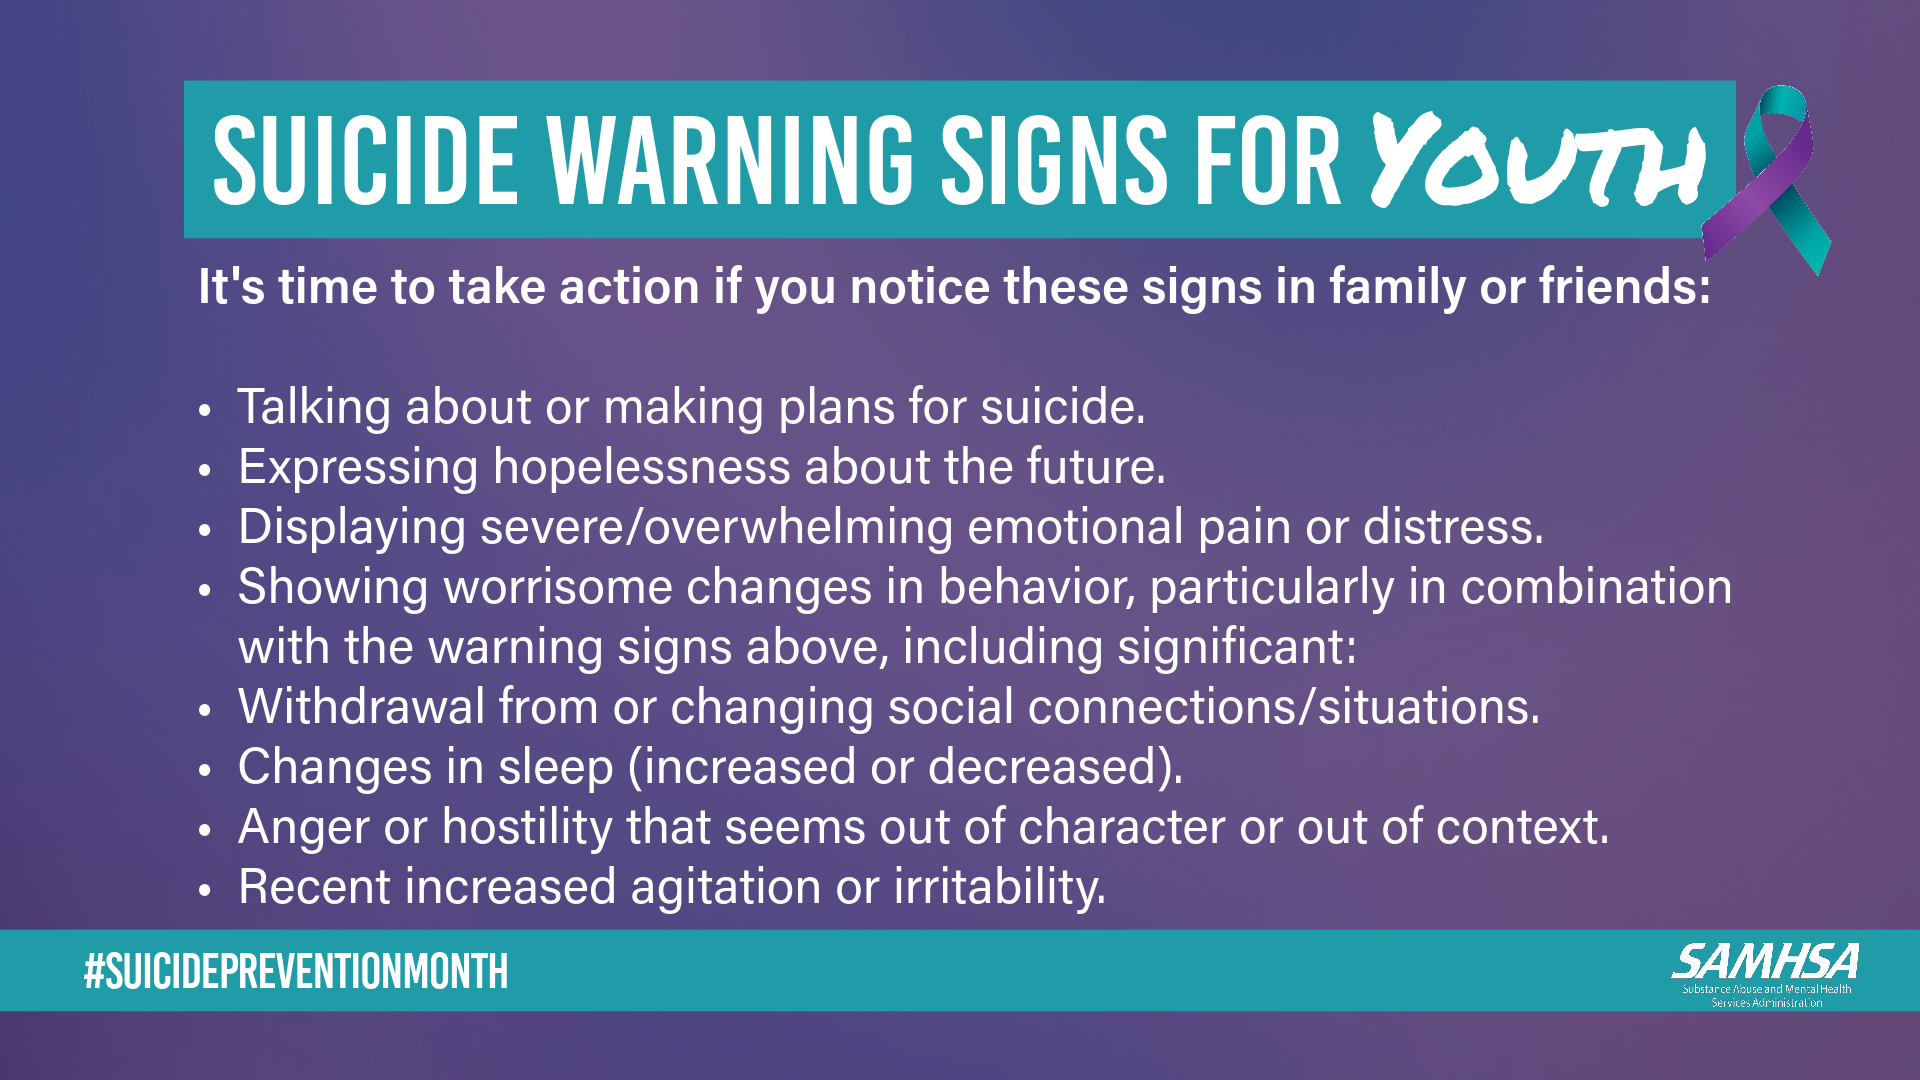 SAMHSA Suicide Warning Signs for Youth Health Promotion